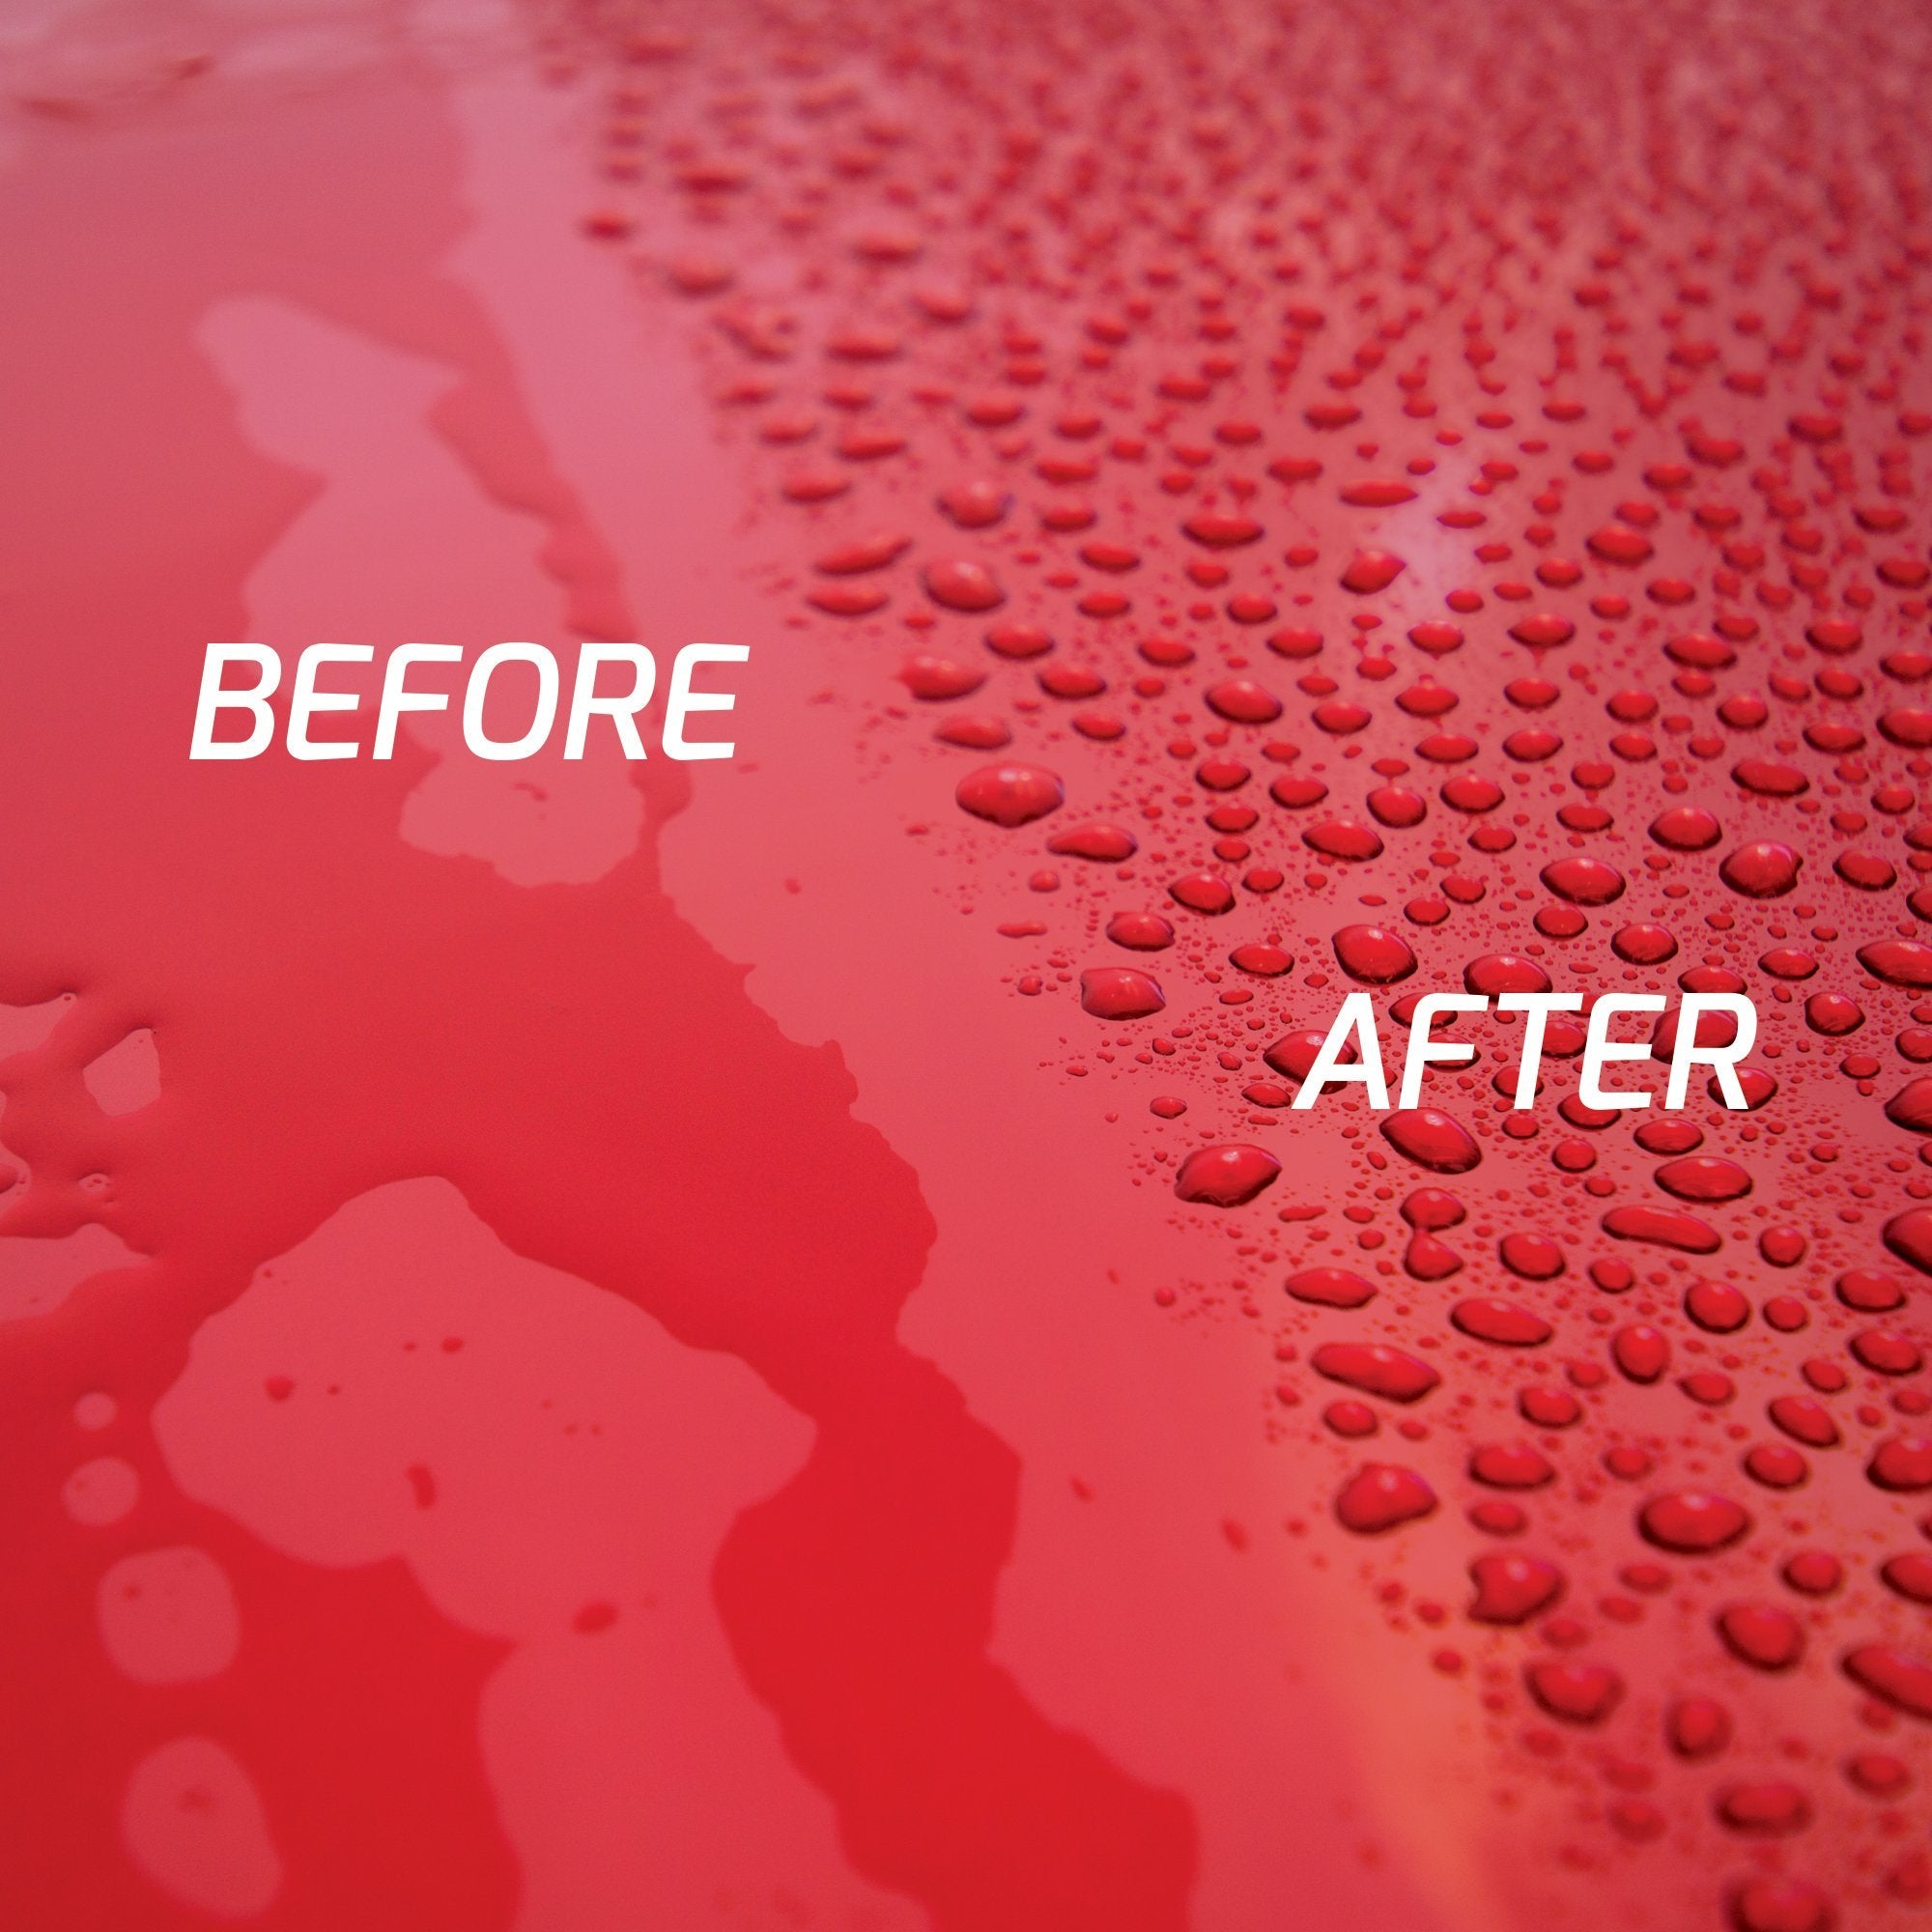 Turtle Wax - The NEW AND IMPROVED ICE Seal N Shine has arrived